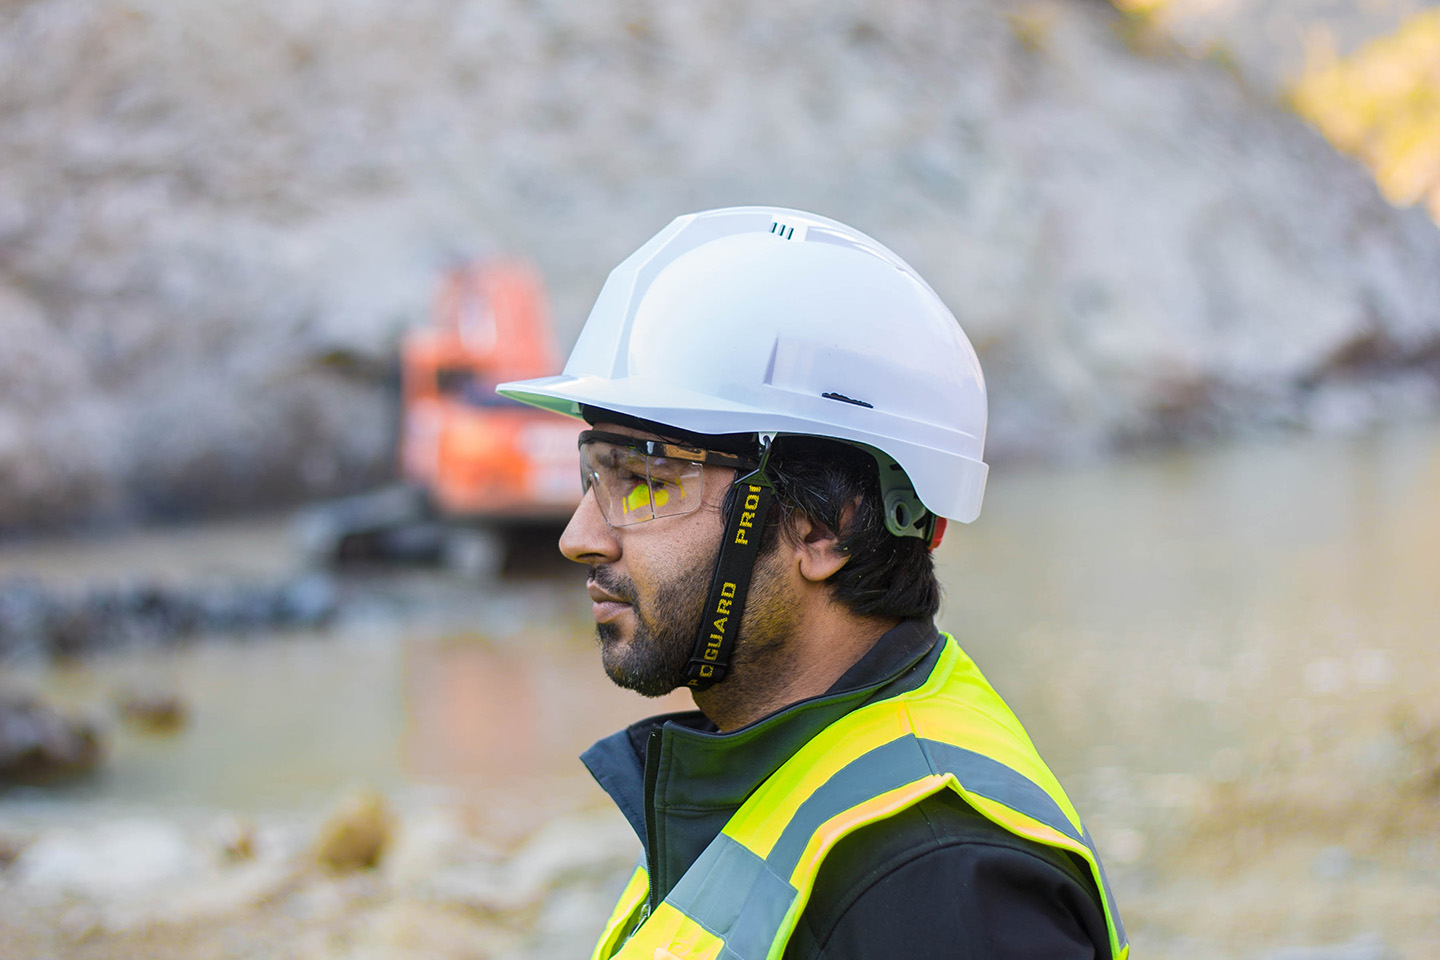 Man with yellow safety vest and white safety helmet standing in front of a small body of water